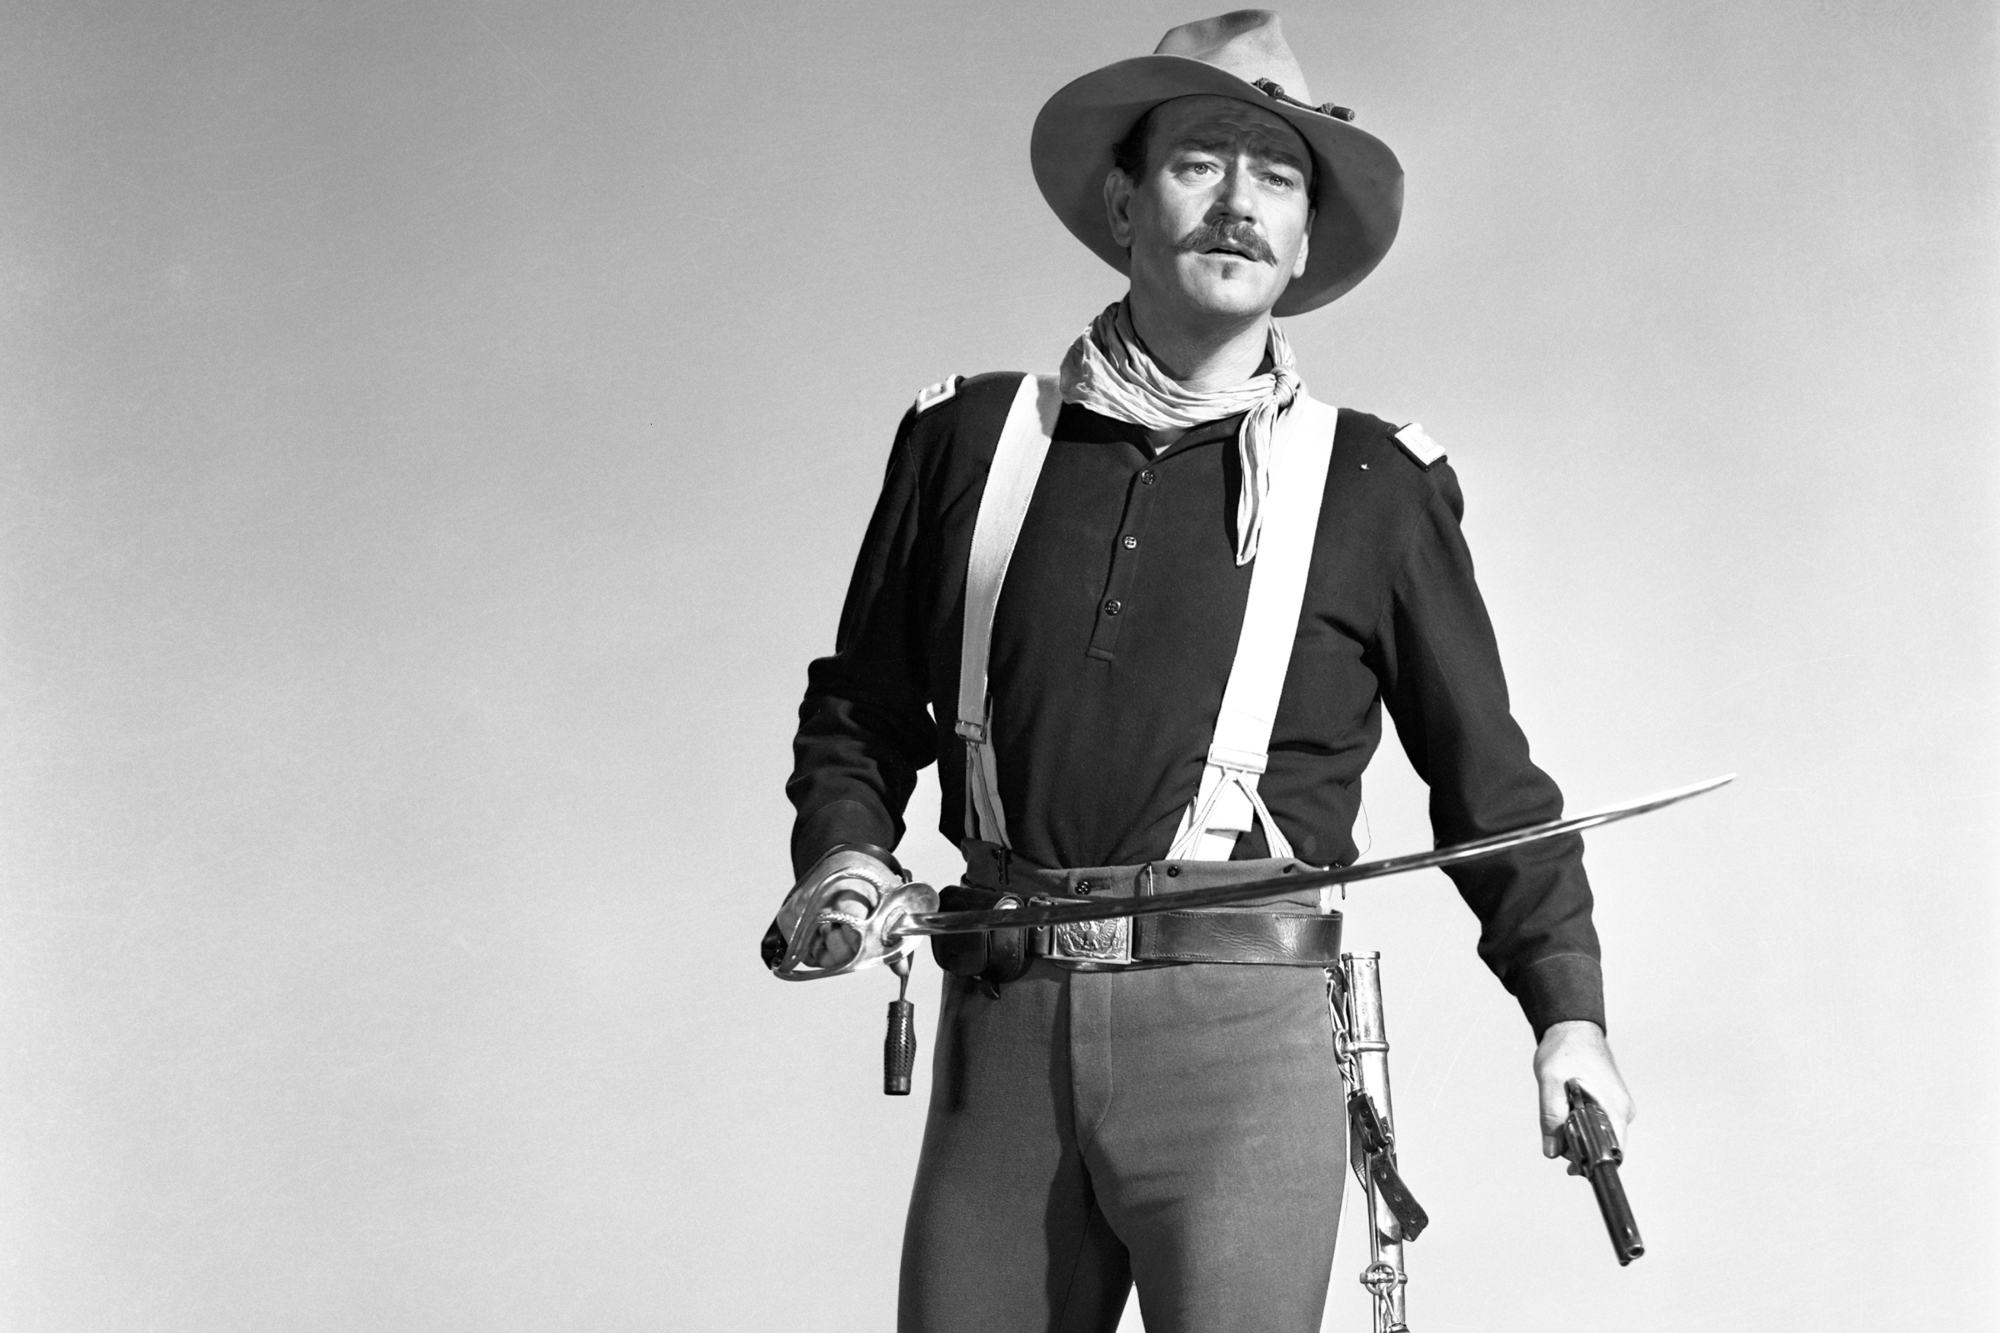 'Rio Grande' actor John Wayne as Lieutenant Colonel Kirby Yorke, whose fake sword ended up on 'Pawn Stars.' A black-and-white picture of him holding a sword and gun, while standing in a Western costume.